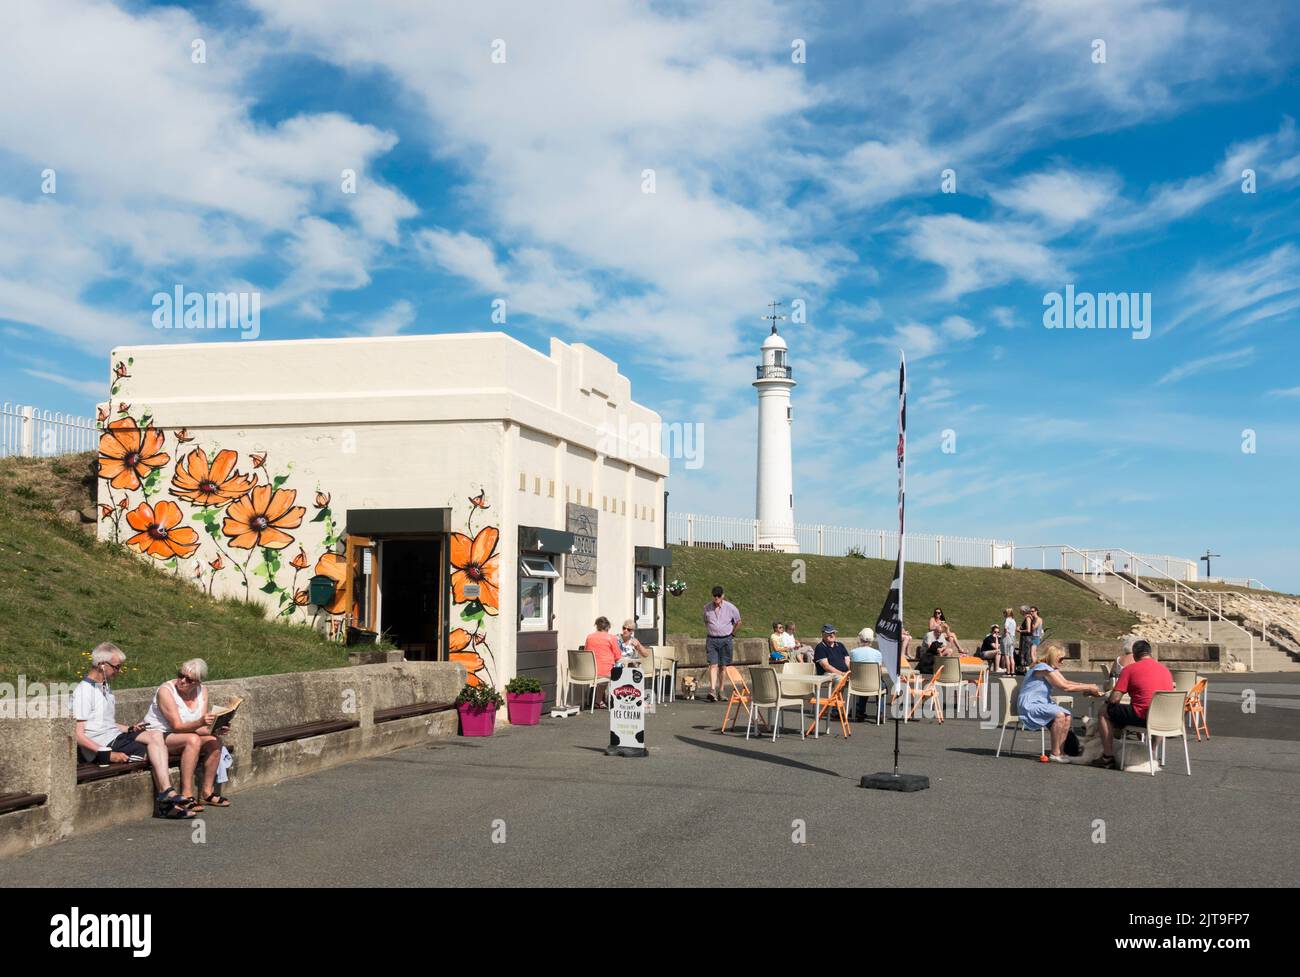 People enjoying a drink at the Hideout Coffee House or seafront café in Seaburn, during the August 2022 heatwave, Sunderland, England, UK Stock Photo